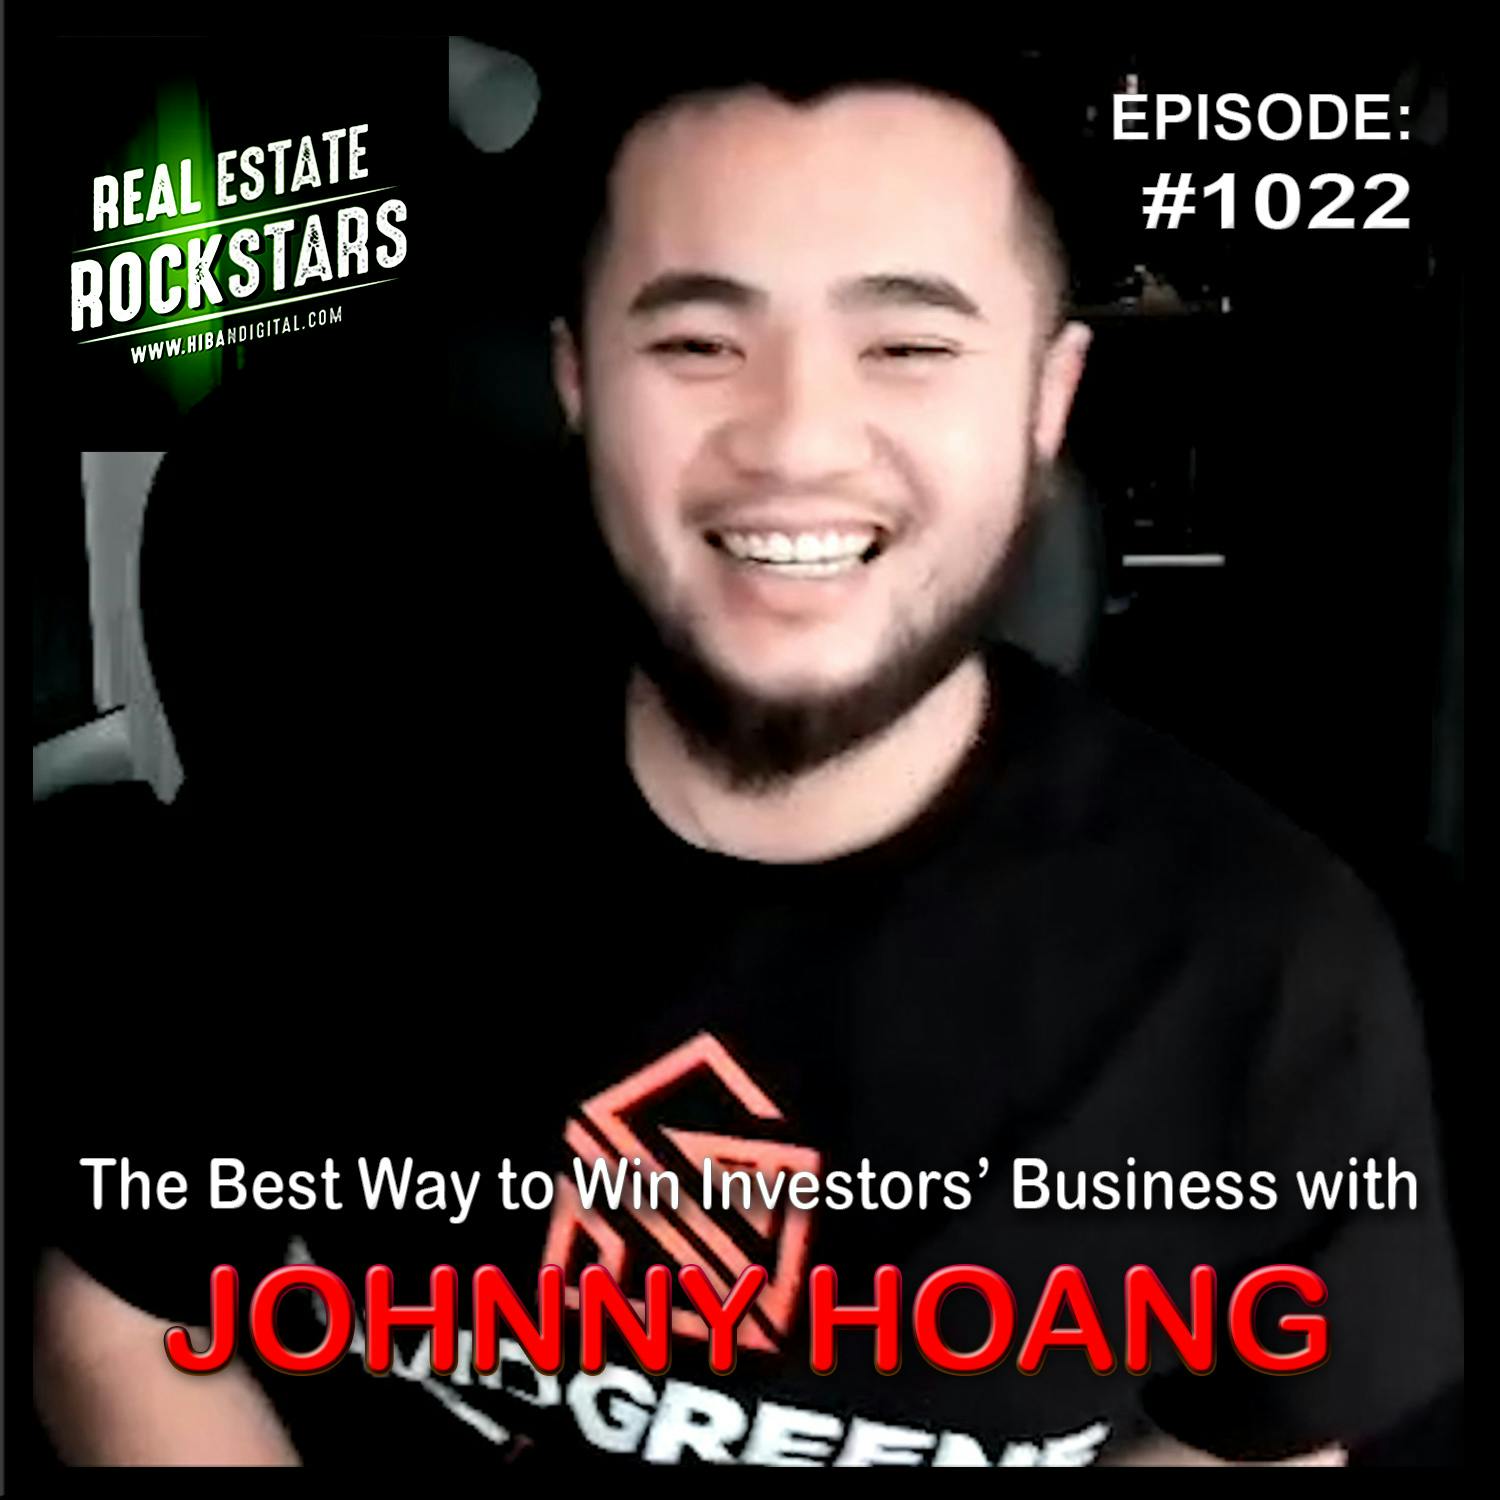 1022: The Best Way to Win Investors’ Business with Johnny Hoang